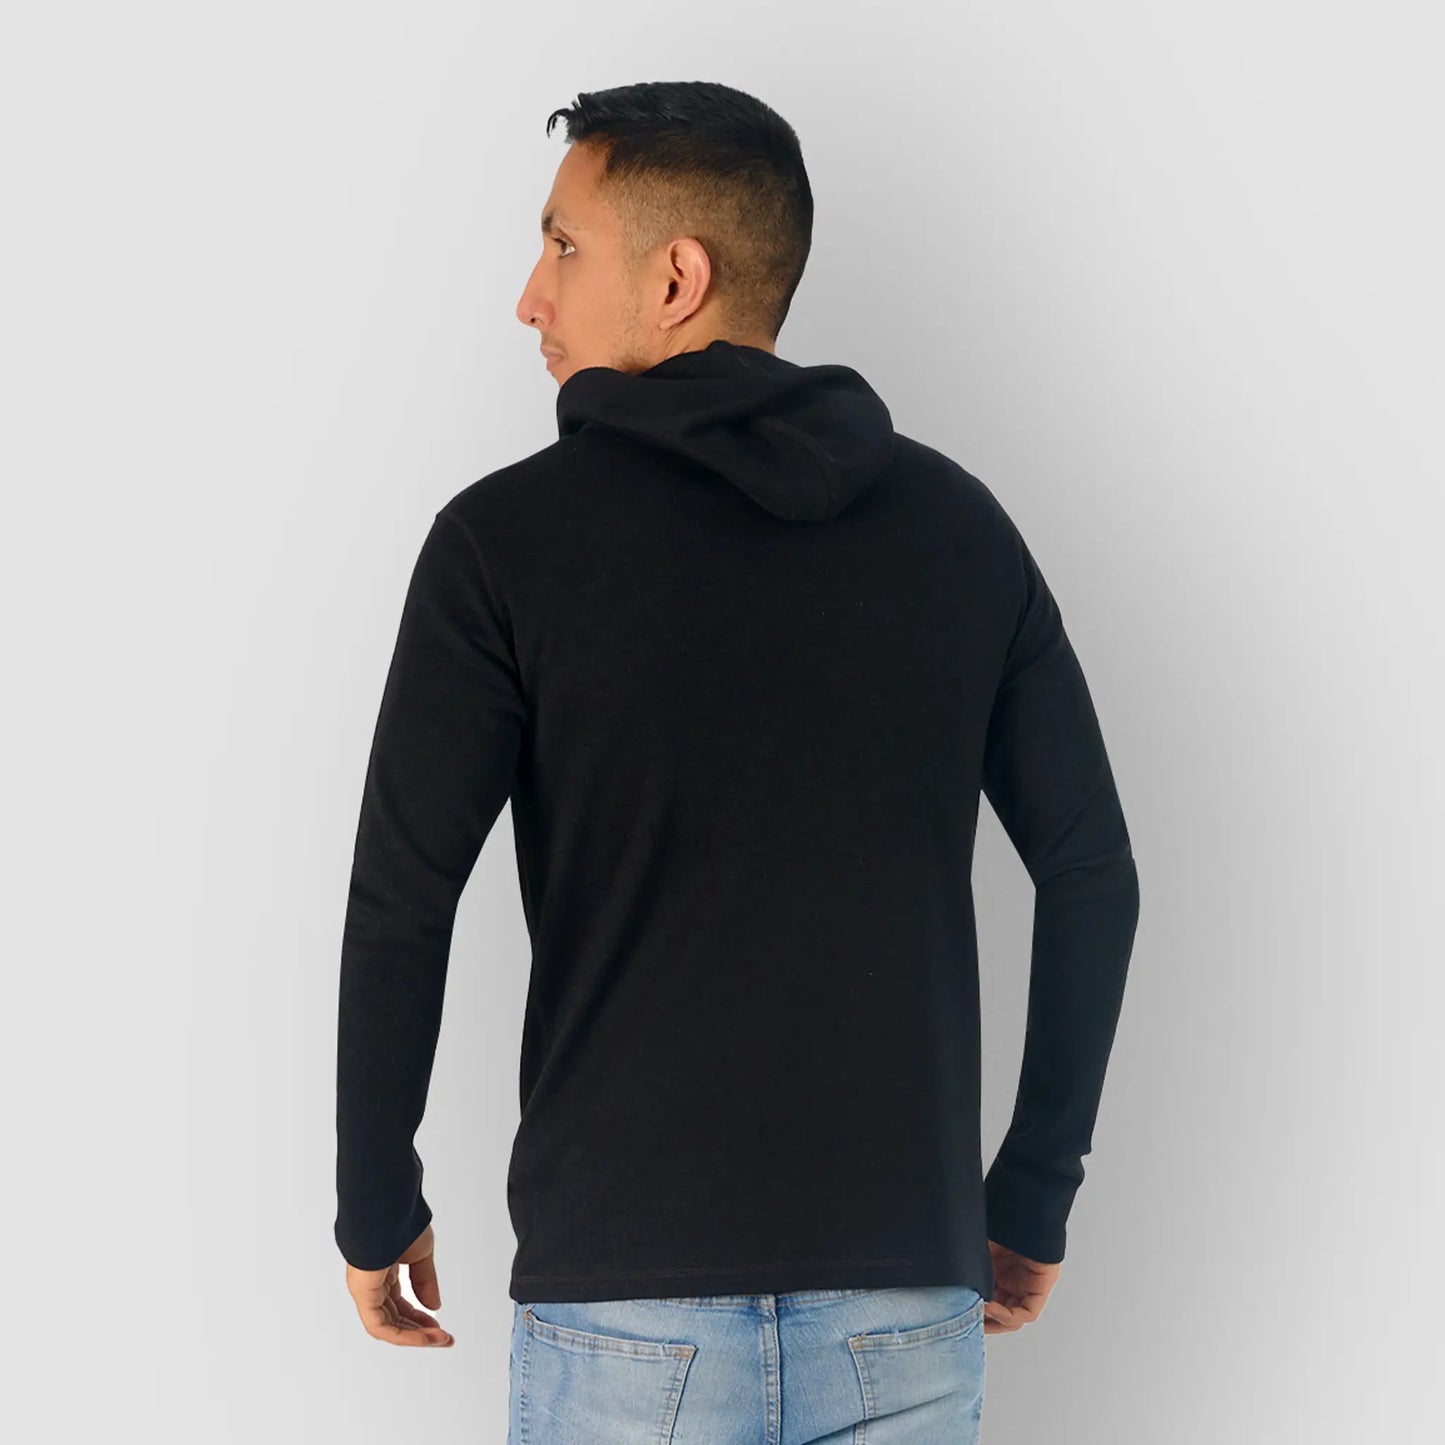 mens high performance pullover hoodie lightweight color black